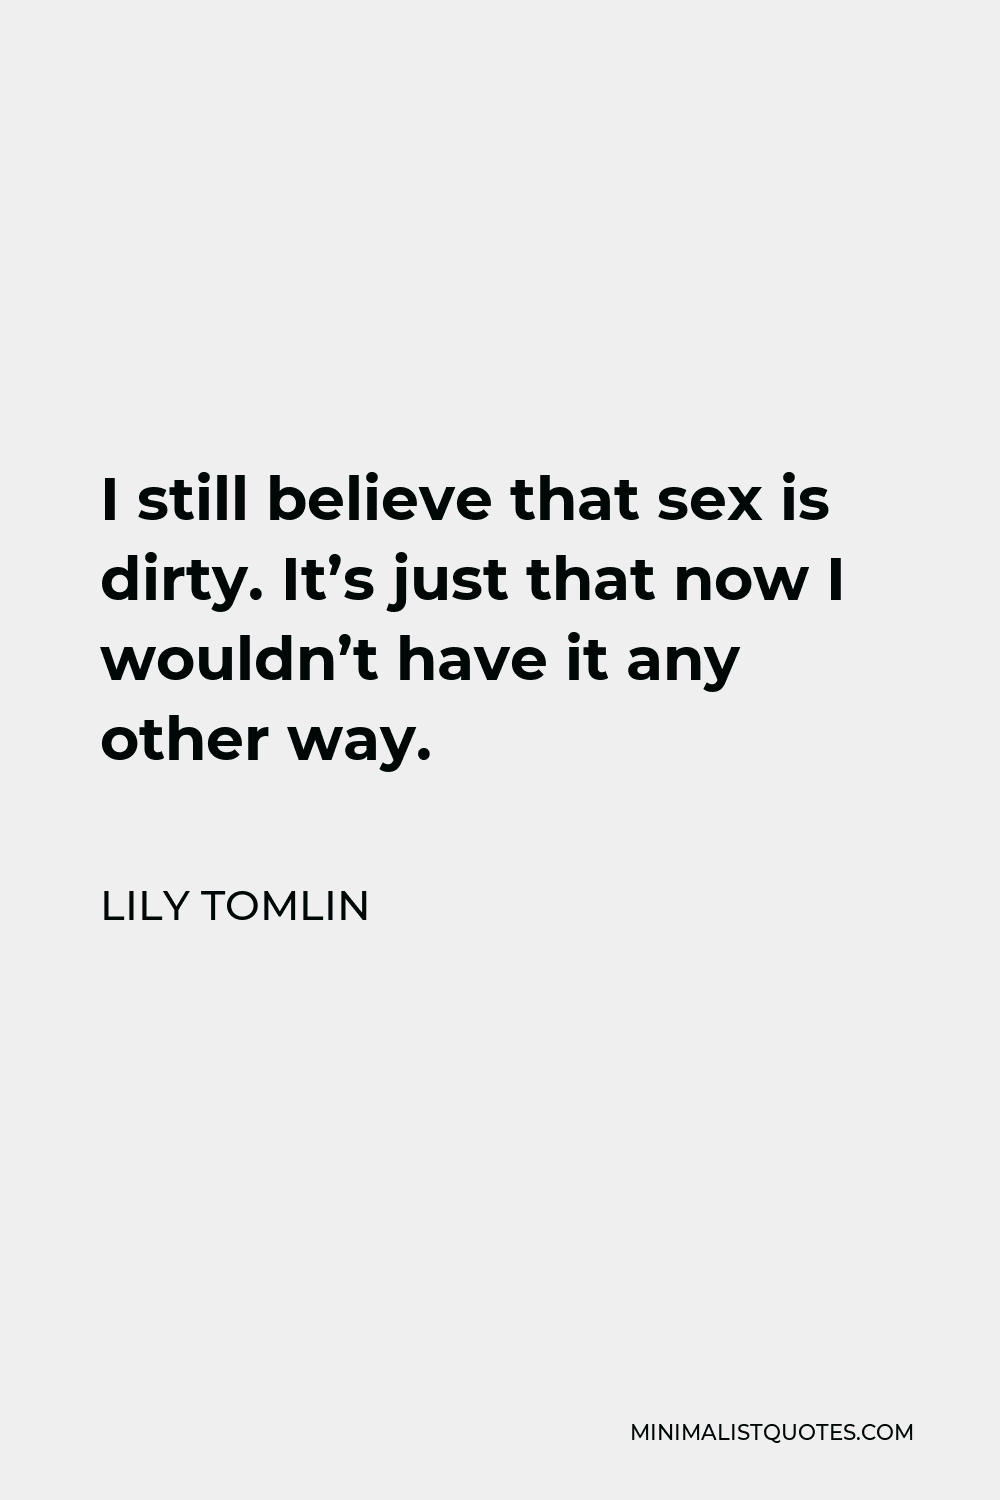 Lily Tomlin Quote - I still believe that sex is dirty. It’s just that now I wouldn’t have it any other way.